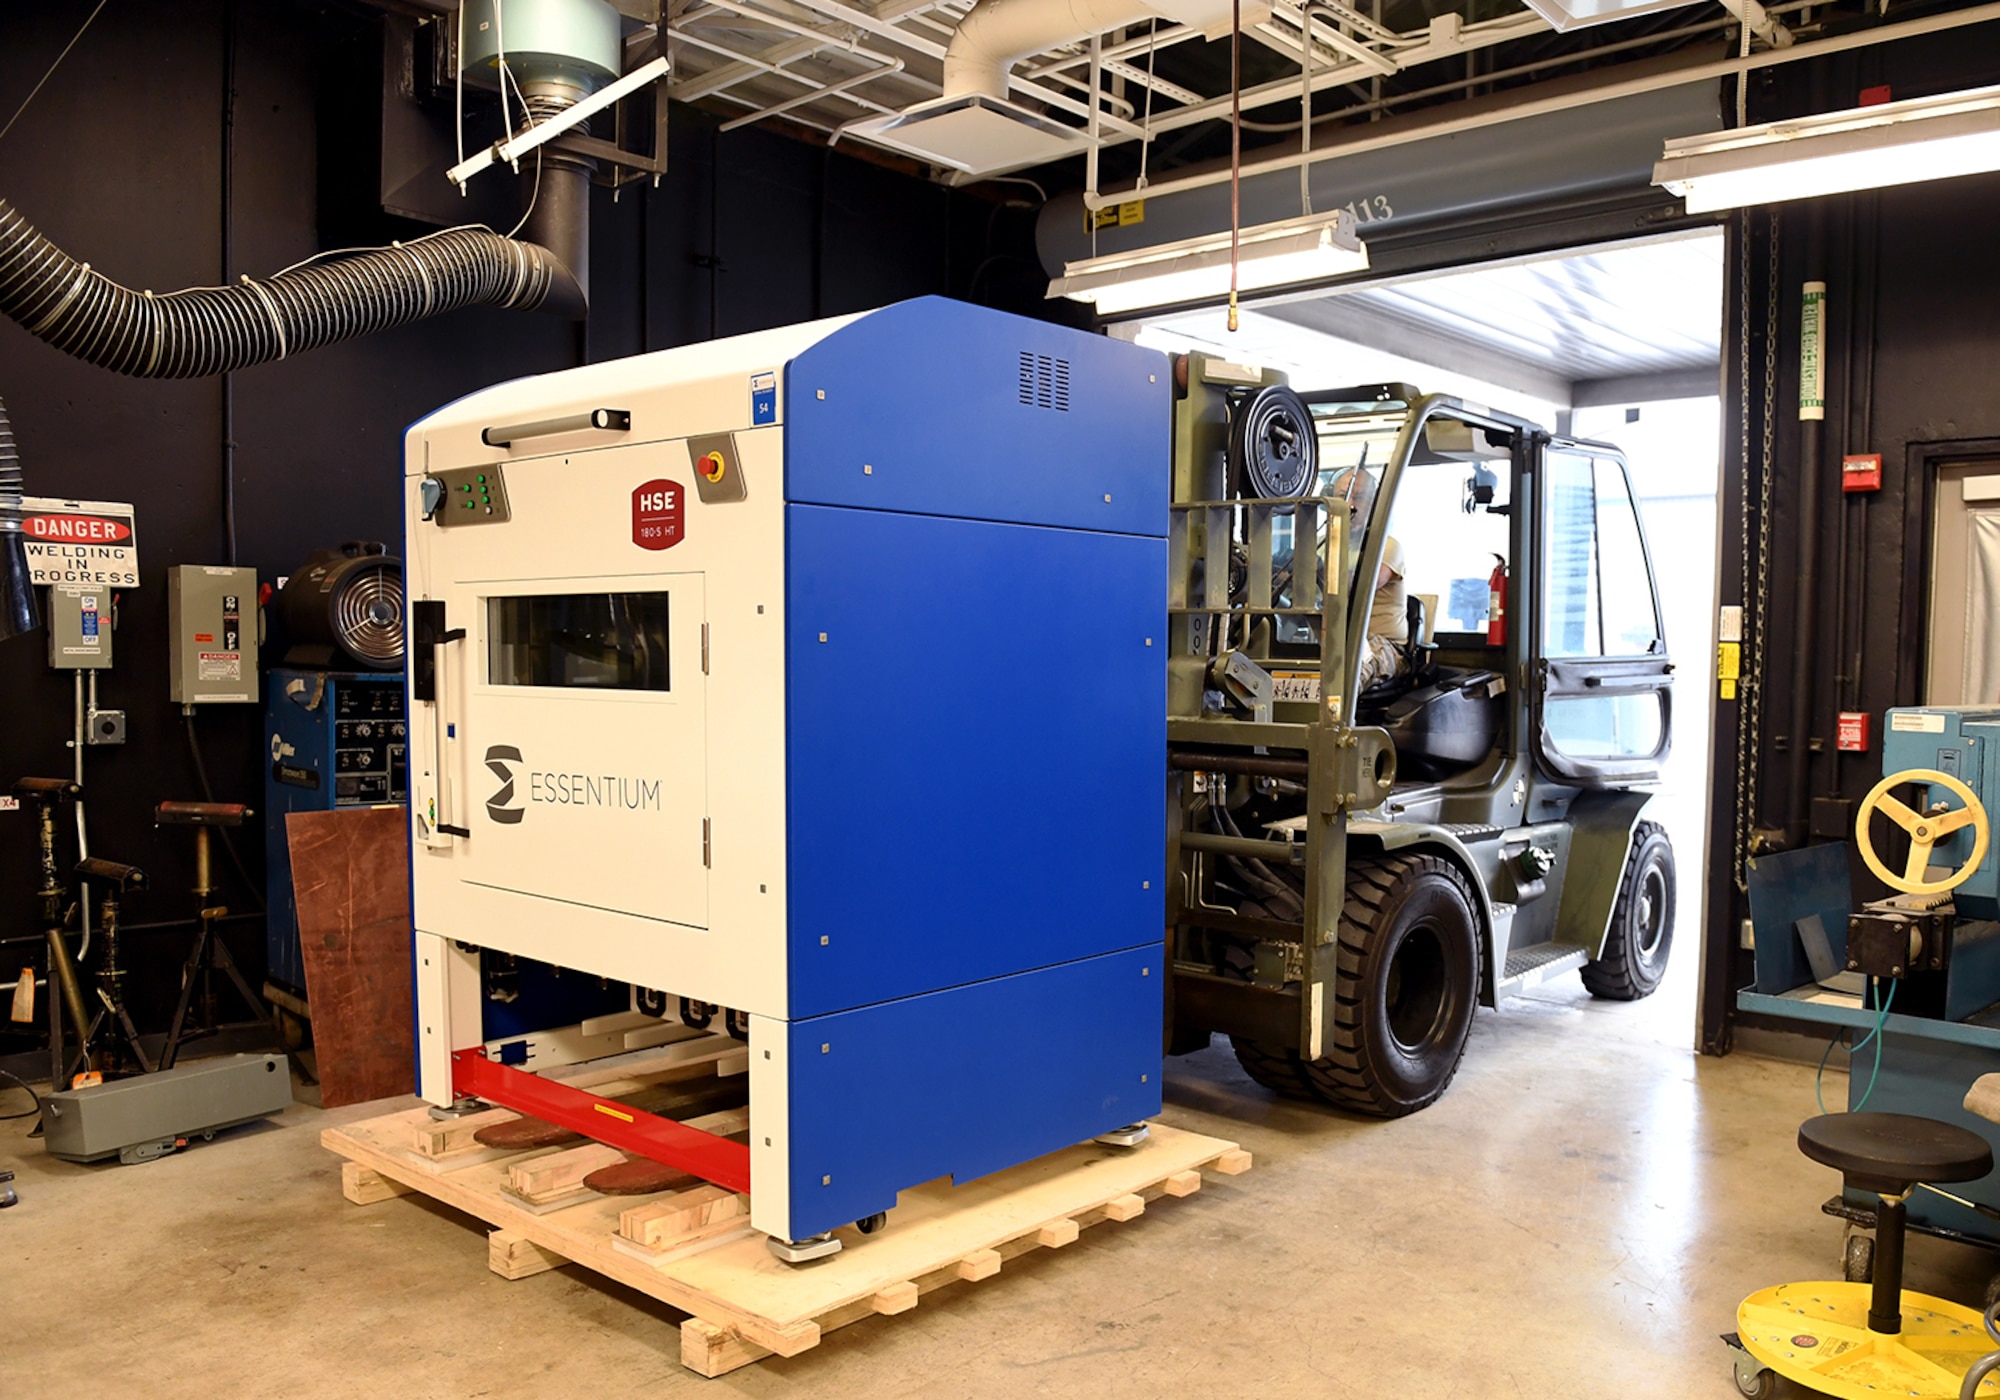 Texas National Guard Master Sgt. Carlos Gil, 149th Maintenance Squadron aircraft metals technician, uses a forklift to move a newly delivered 3D printer Aug. 12, 2020, at Joint Base San Antonio-Lackland, Texas.